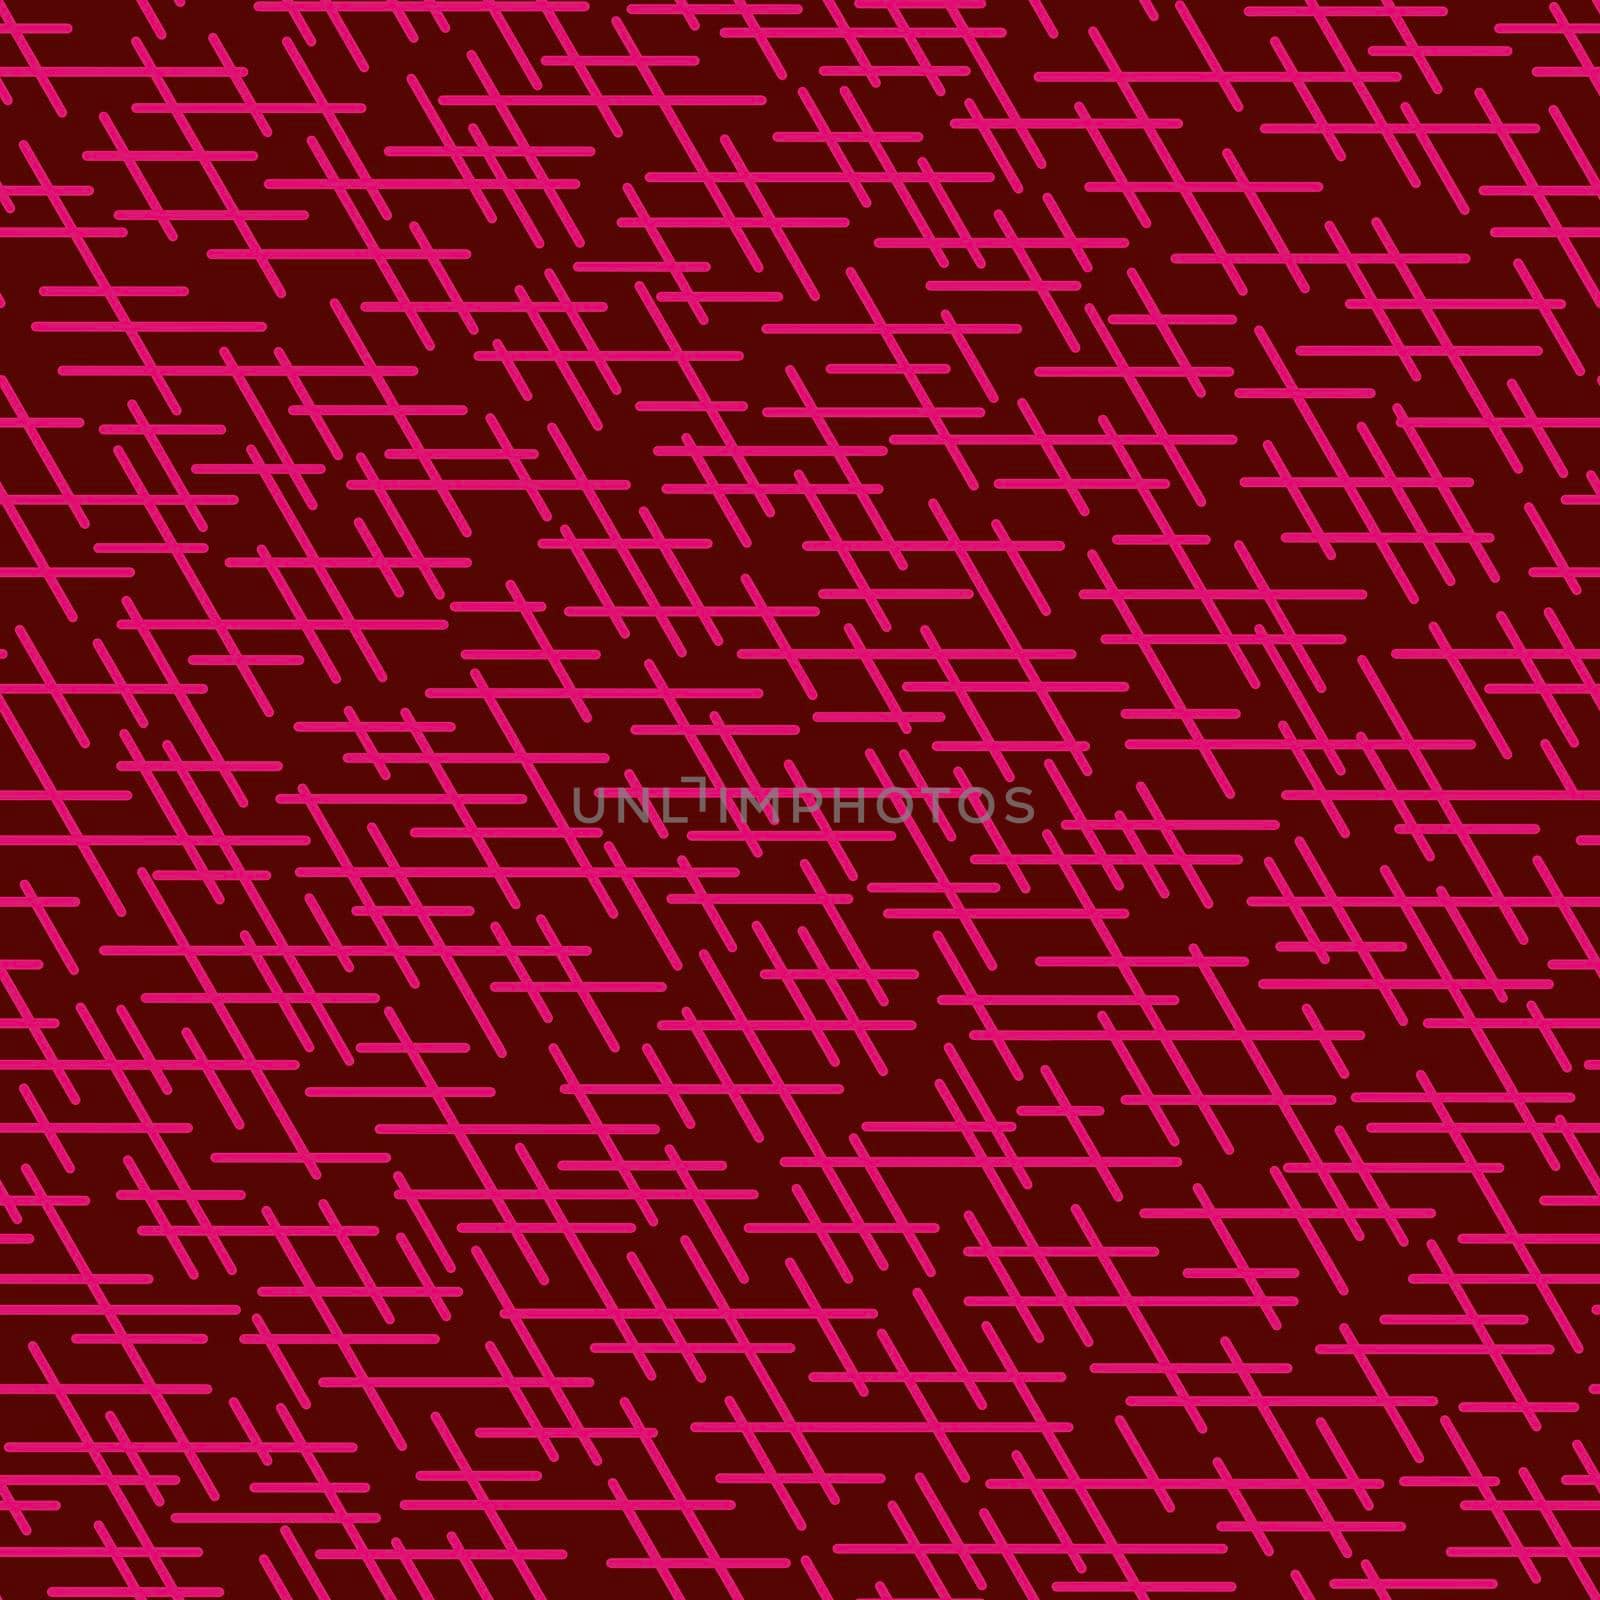 Randomly crossing lines making pattern.Chaotic short lines seamless pattern,chips and sticks modern repeatable motif.Good for print, textile,fabric, background, wrapping paper.Burgundy pink colors by Angelsmoon